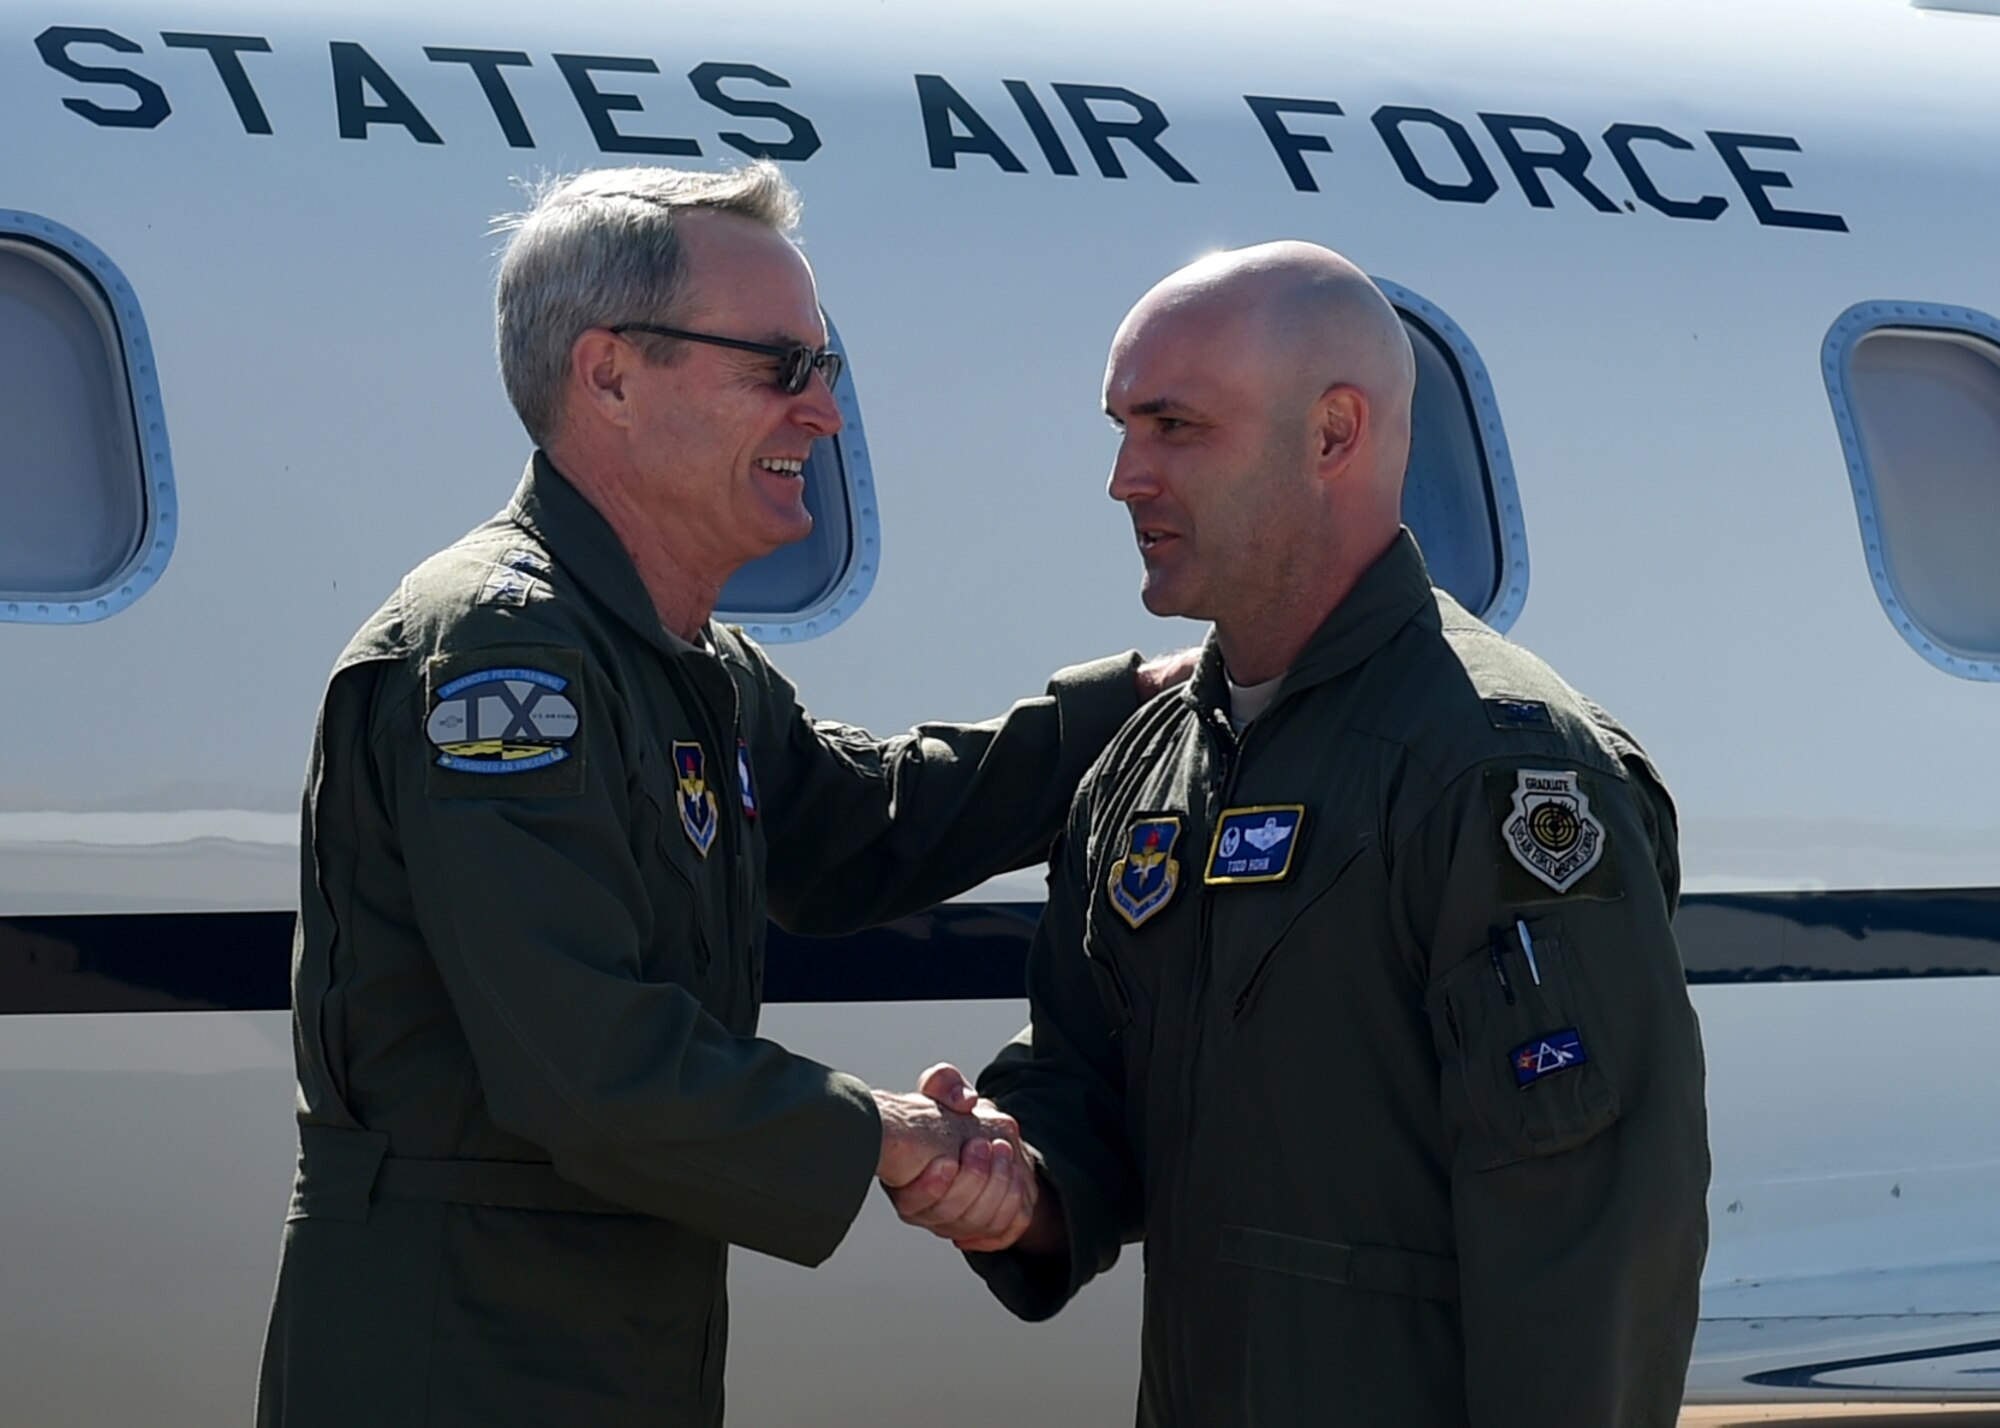 U.S. Air Force Lt. Gen. Darryl Roberson, commander of Air Education and Training Command, is greeted on the flightline, by U.S. Air Force Col. Todd Hohn, 97th Air Mobility Wing commander, April 25, 2016 at Altus Air Force Base, Okla. Roberson visited Altus AFB to gain a better understanding of the base’s training mission and discuss Air Force topics, including the U.S. Air Force KC-46 Pegasus, the importance of AETC missions and the need for innovation in the U.S. Air Force. (U.S. Air Force photo by Airman 1st Class Kirby Turbak/Released)